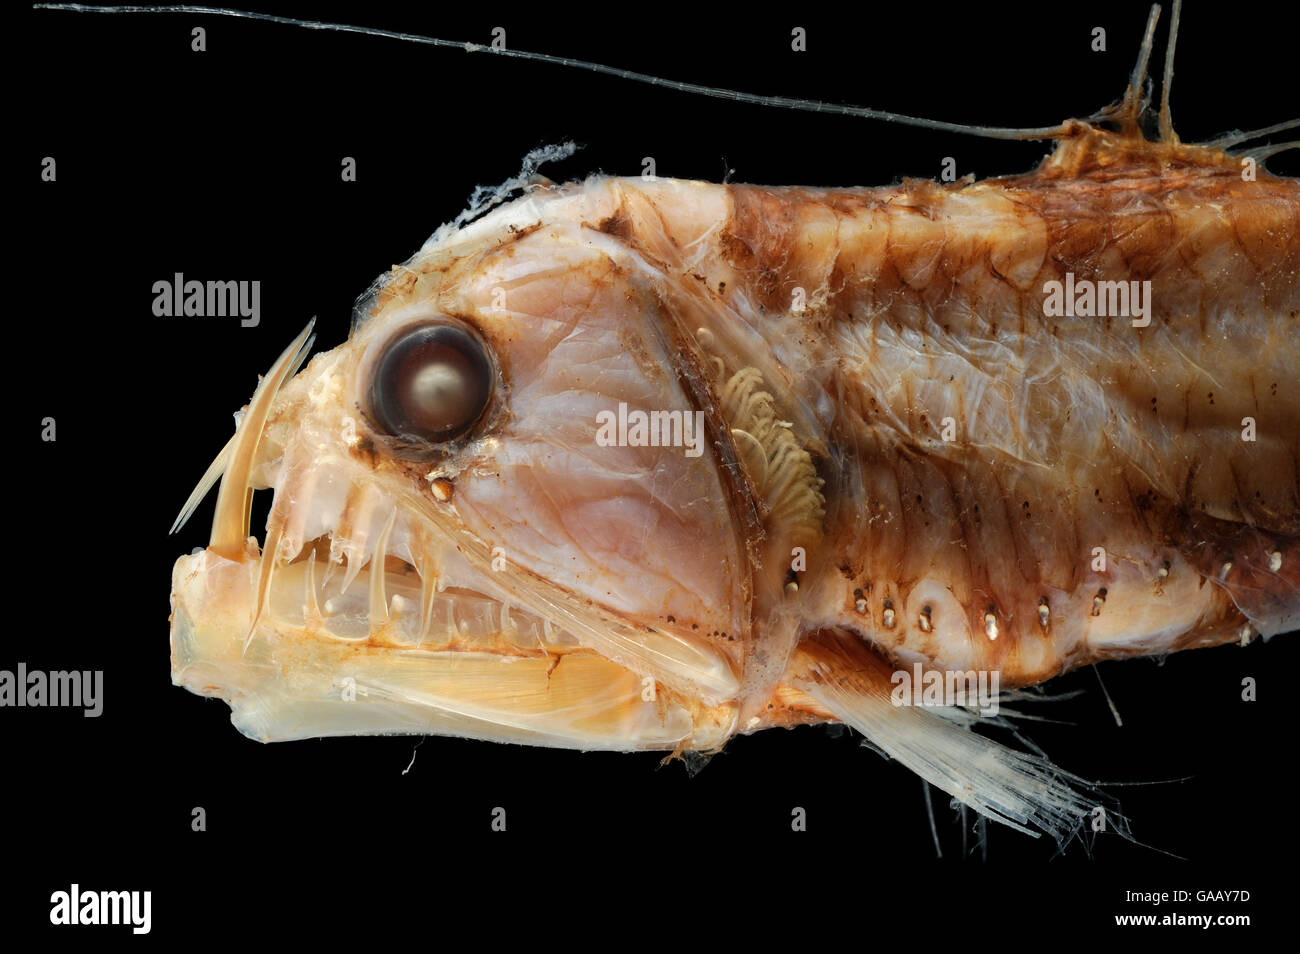 Deepsea Viperfish (Chauliodus sloani) specimen from the North Atlantic near the North West of Spain, at a dept of 560-580m. Stock Photo